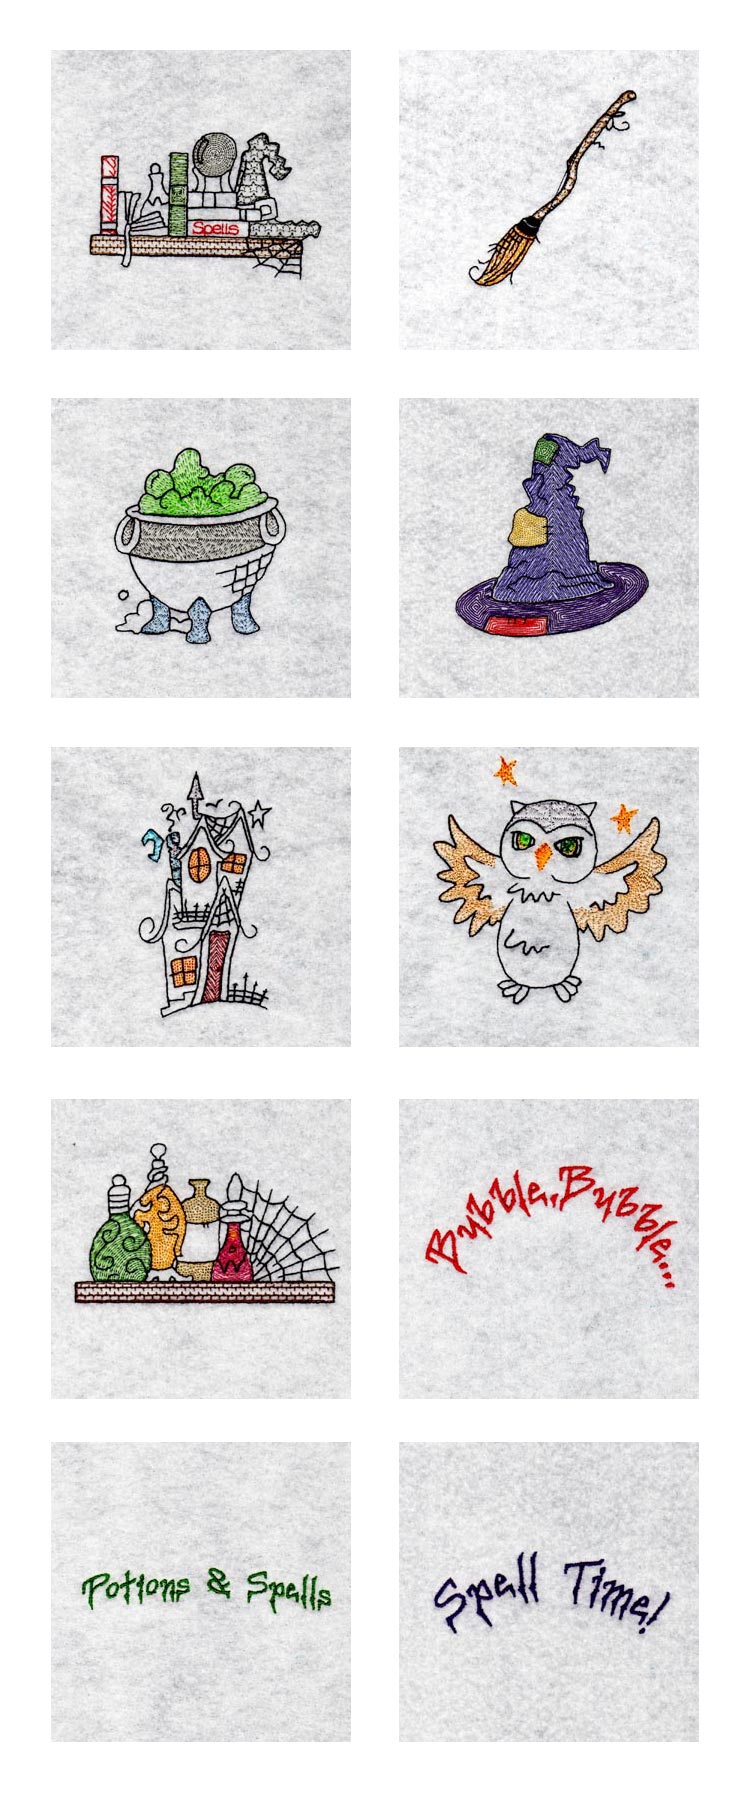 Magical Tidbits Embroidery Machine Design Details